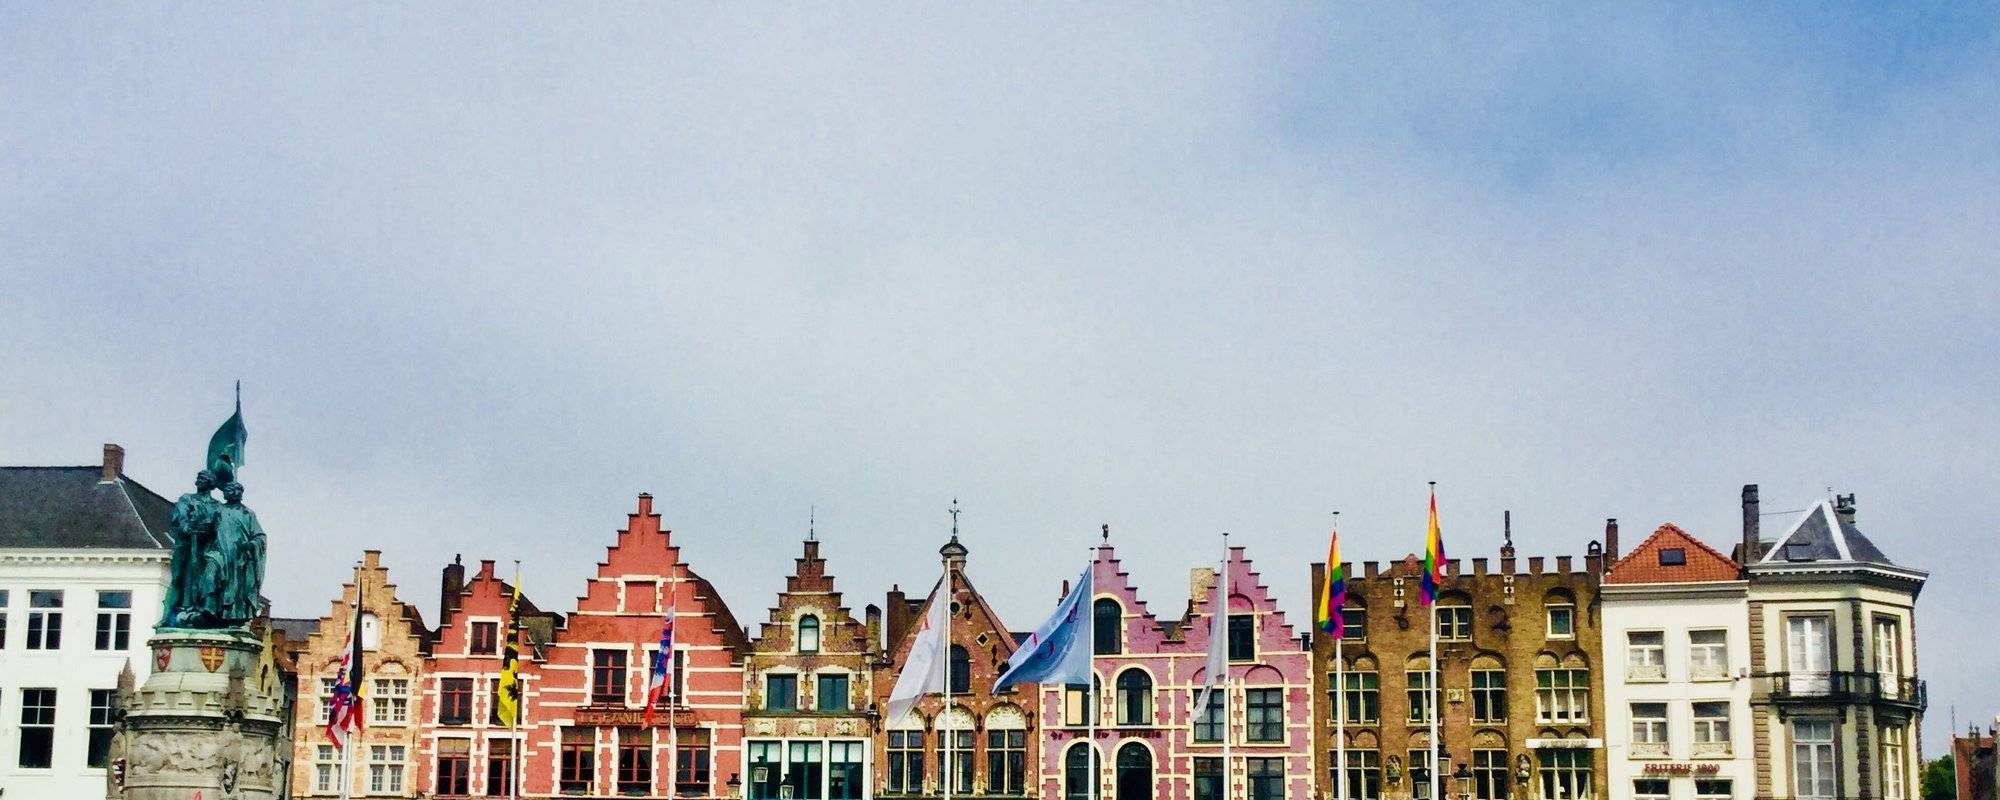 TRAVELMAN BRUGES, BELGIUM: Travelman, the Uninformed Tour Guide Who Just Makes Sh*t Up Instead